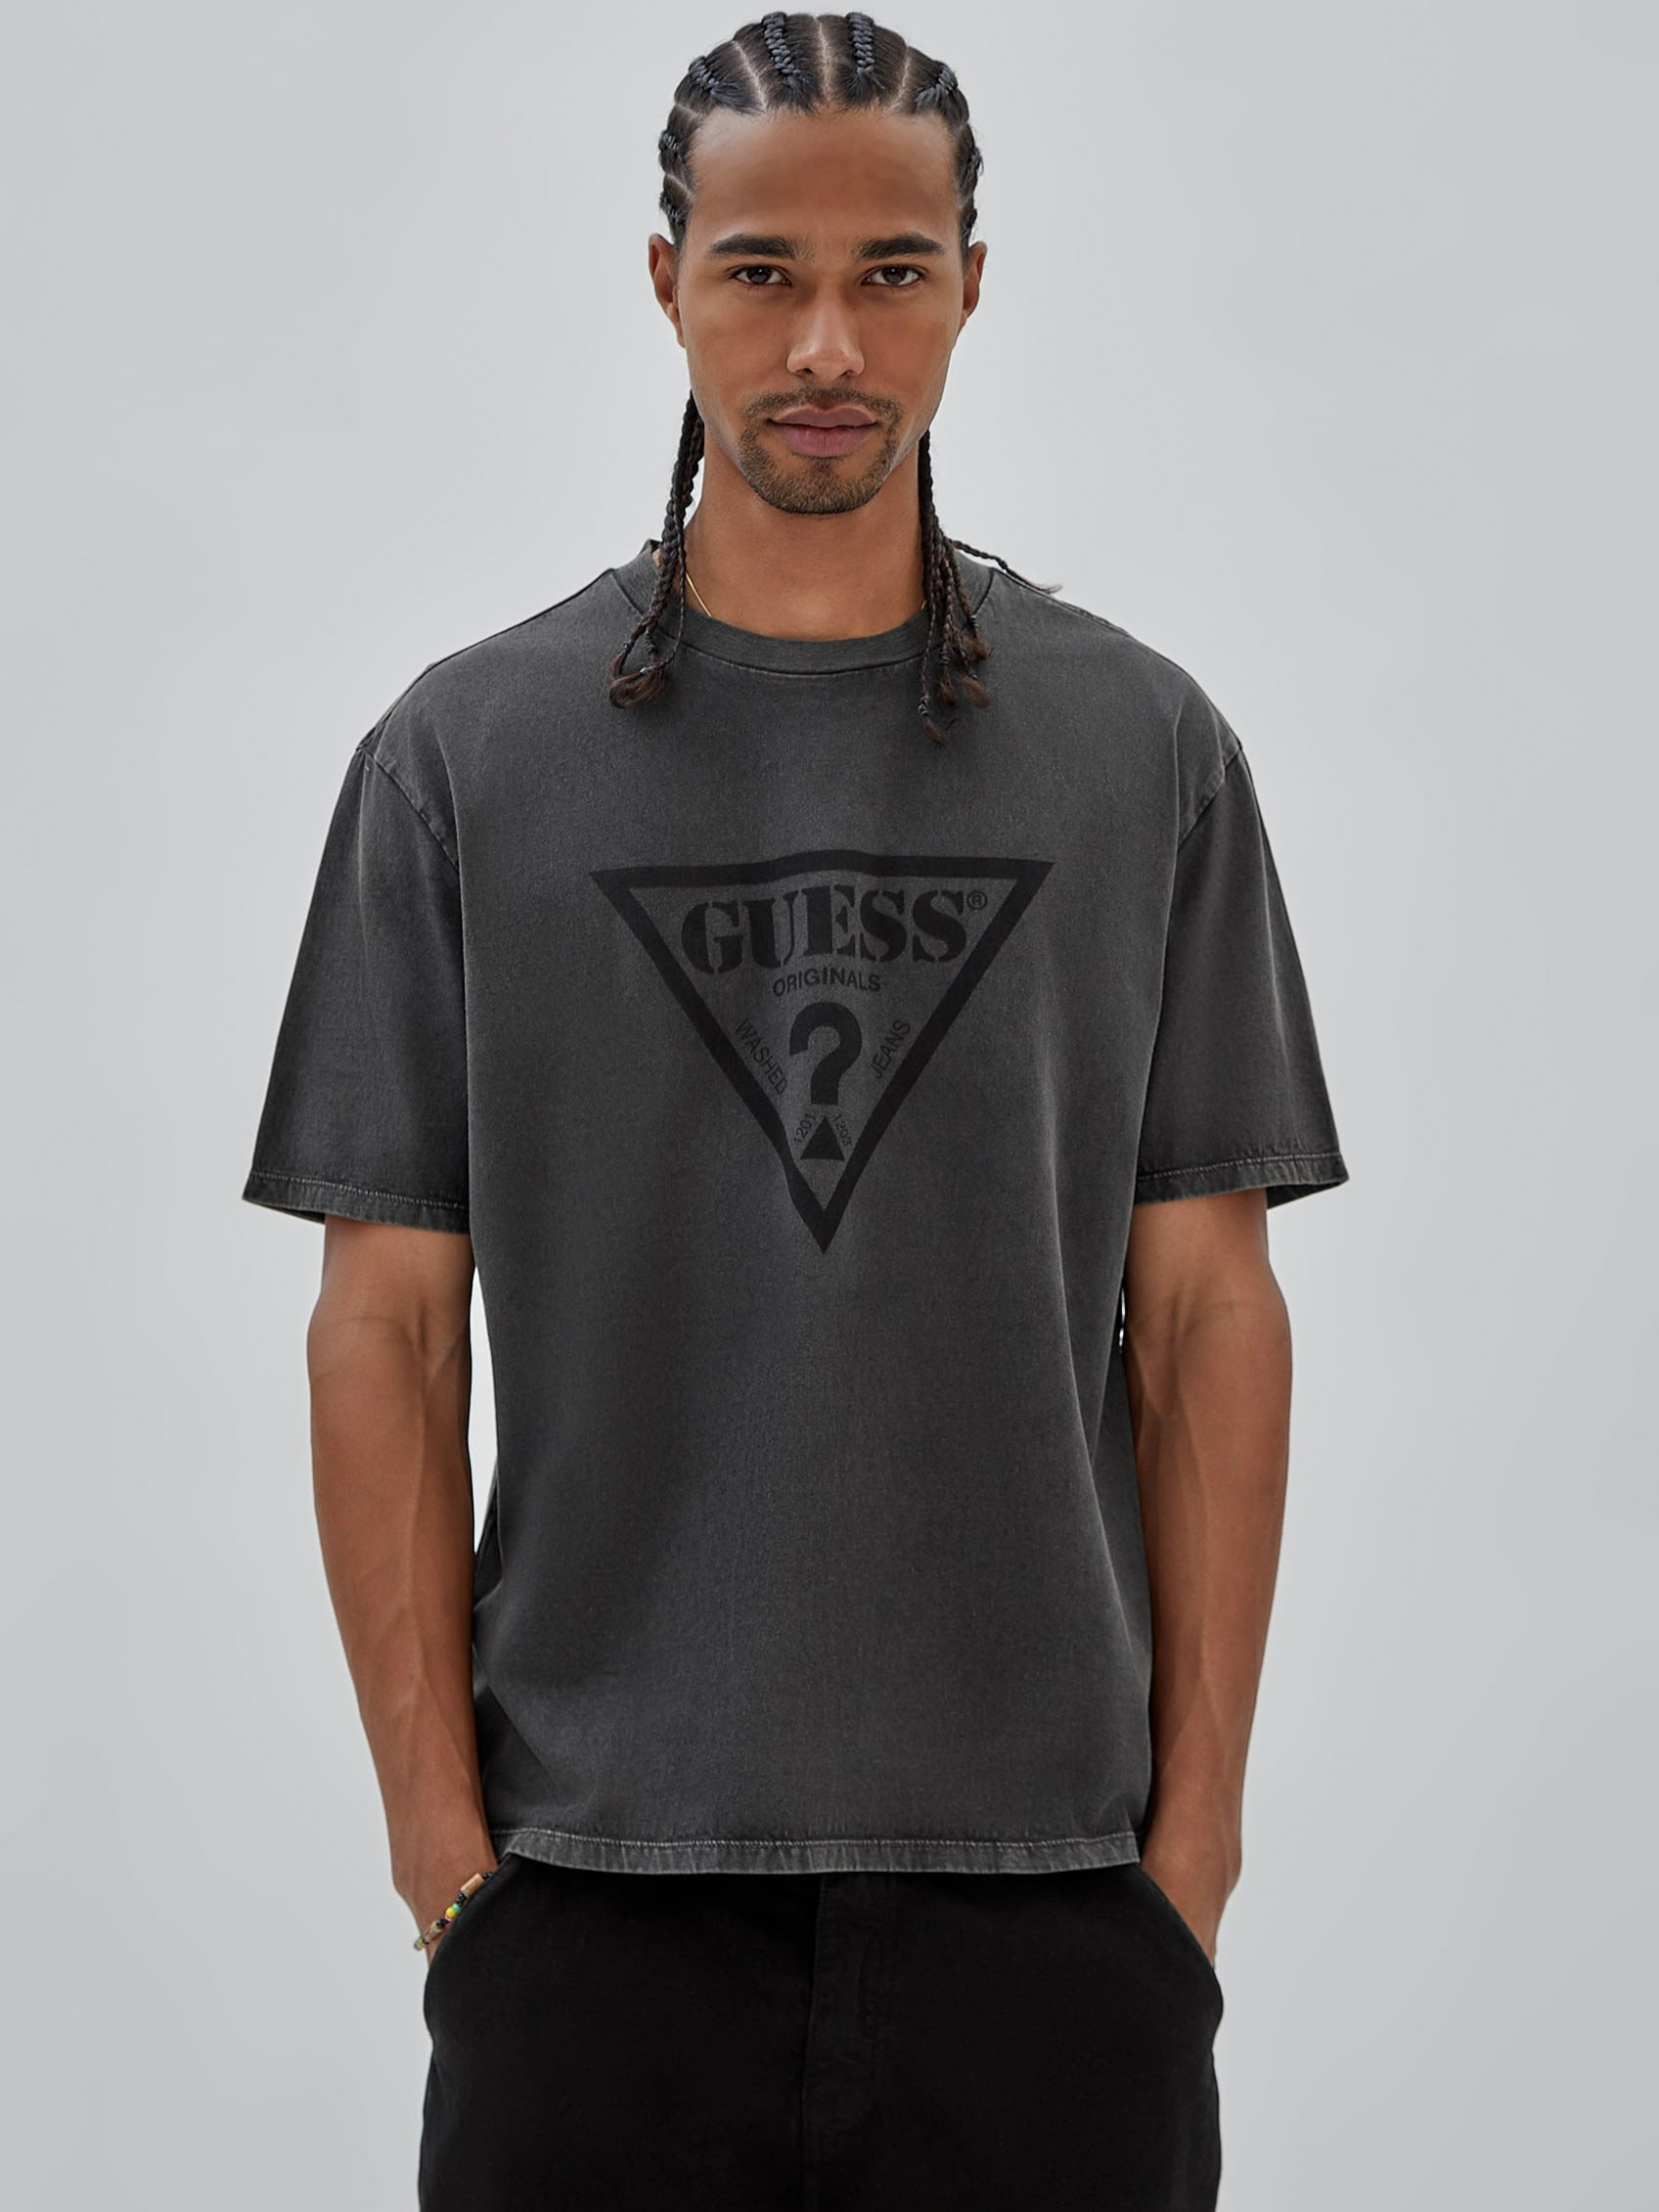 GUESS Originals VINTAGE TRIANGLE TEE | Guess Philippines